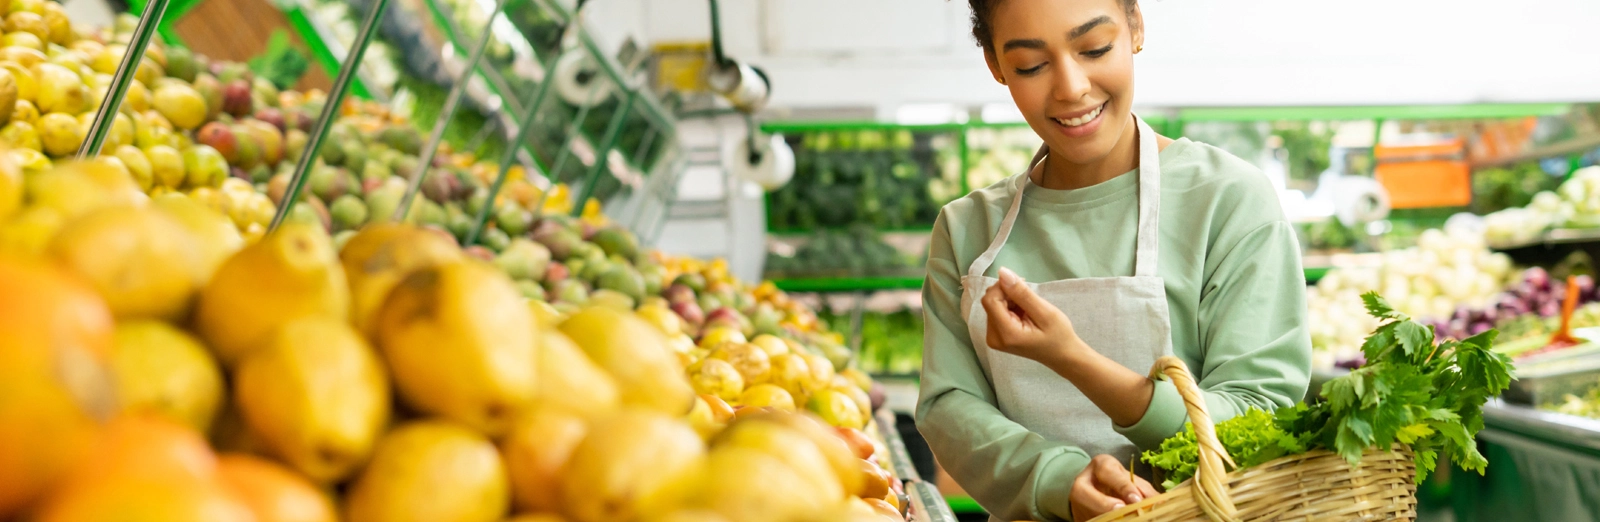 woman-shopping-for-produce-1600x522.webp